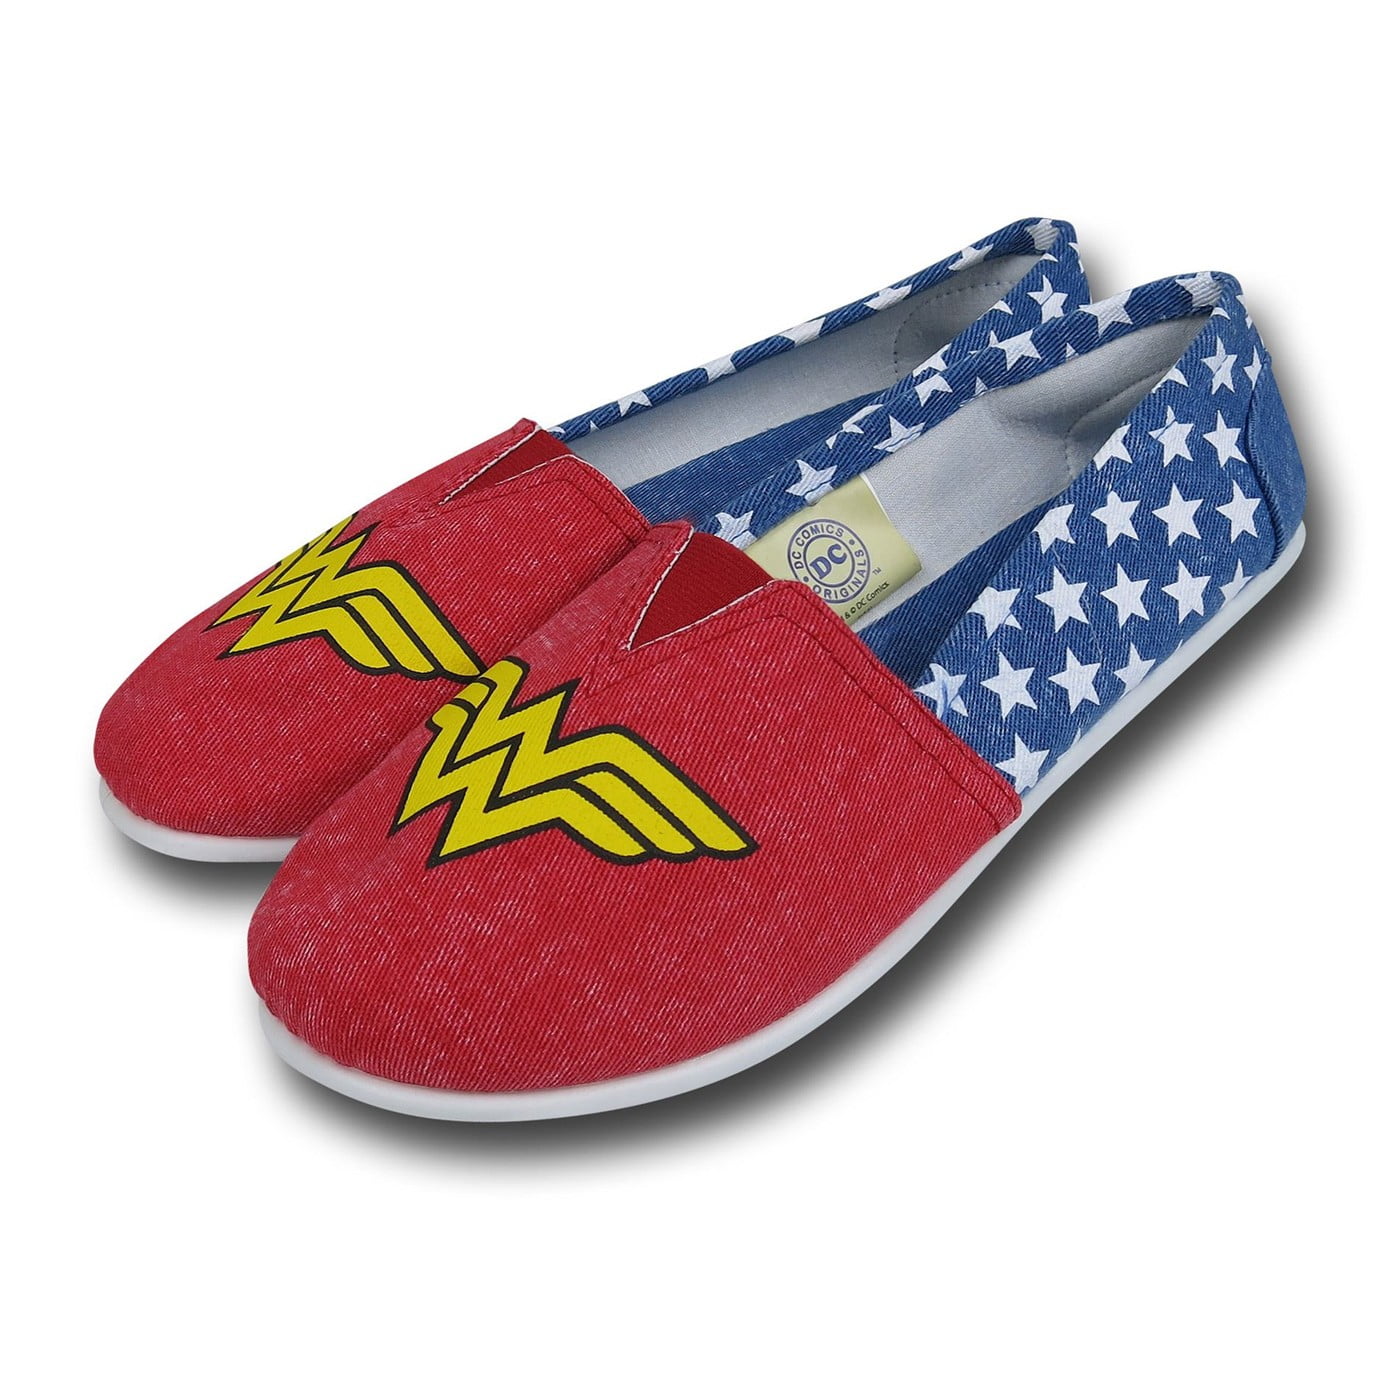 Brand New Wonder Woman licensed shoes sneakers low top Womens size 8 